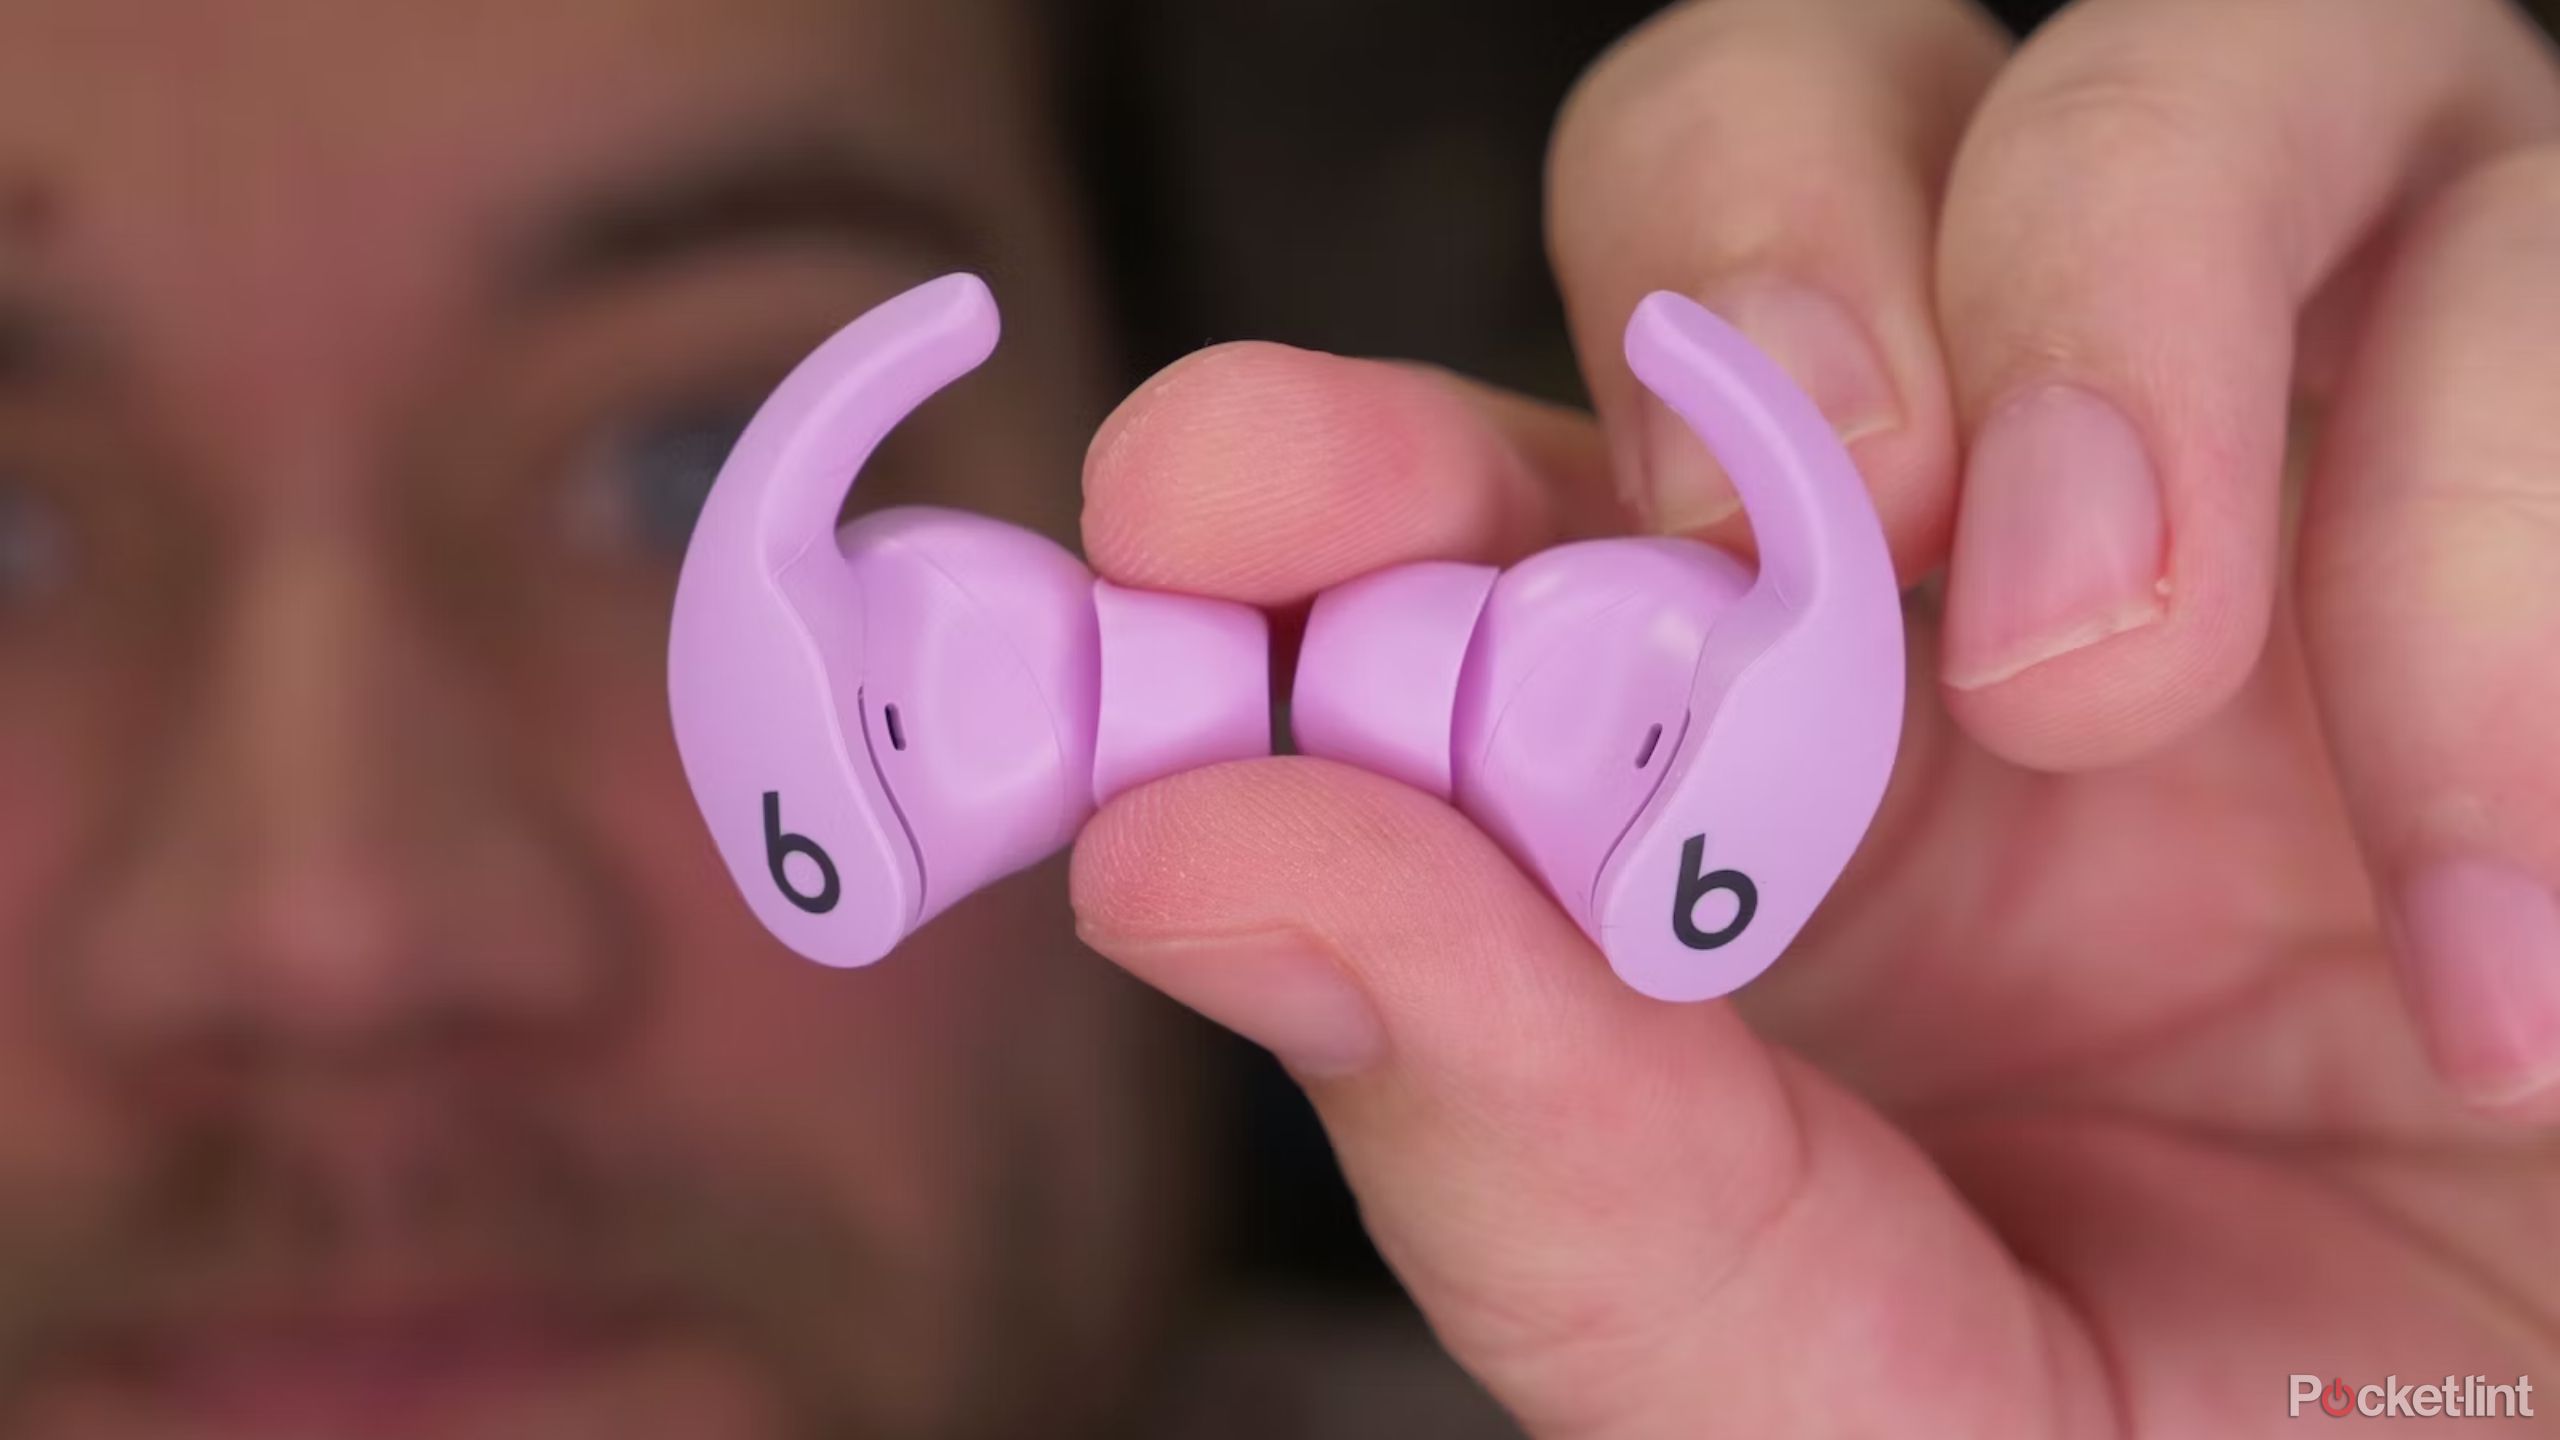 Pink Beats Fit Pro buds in hand.